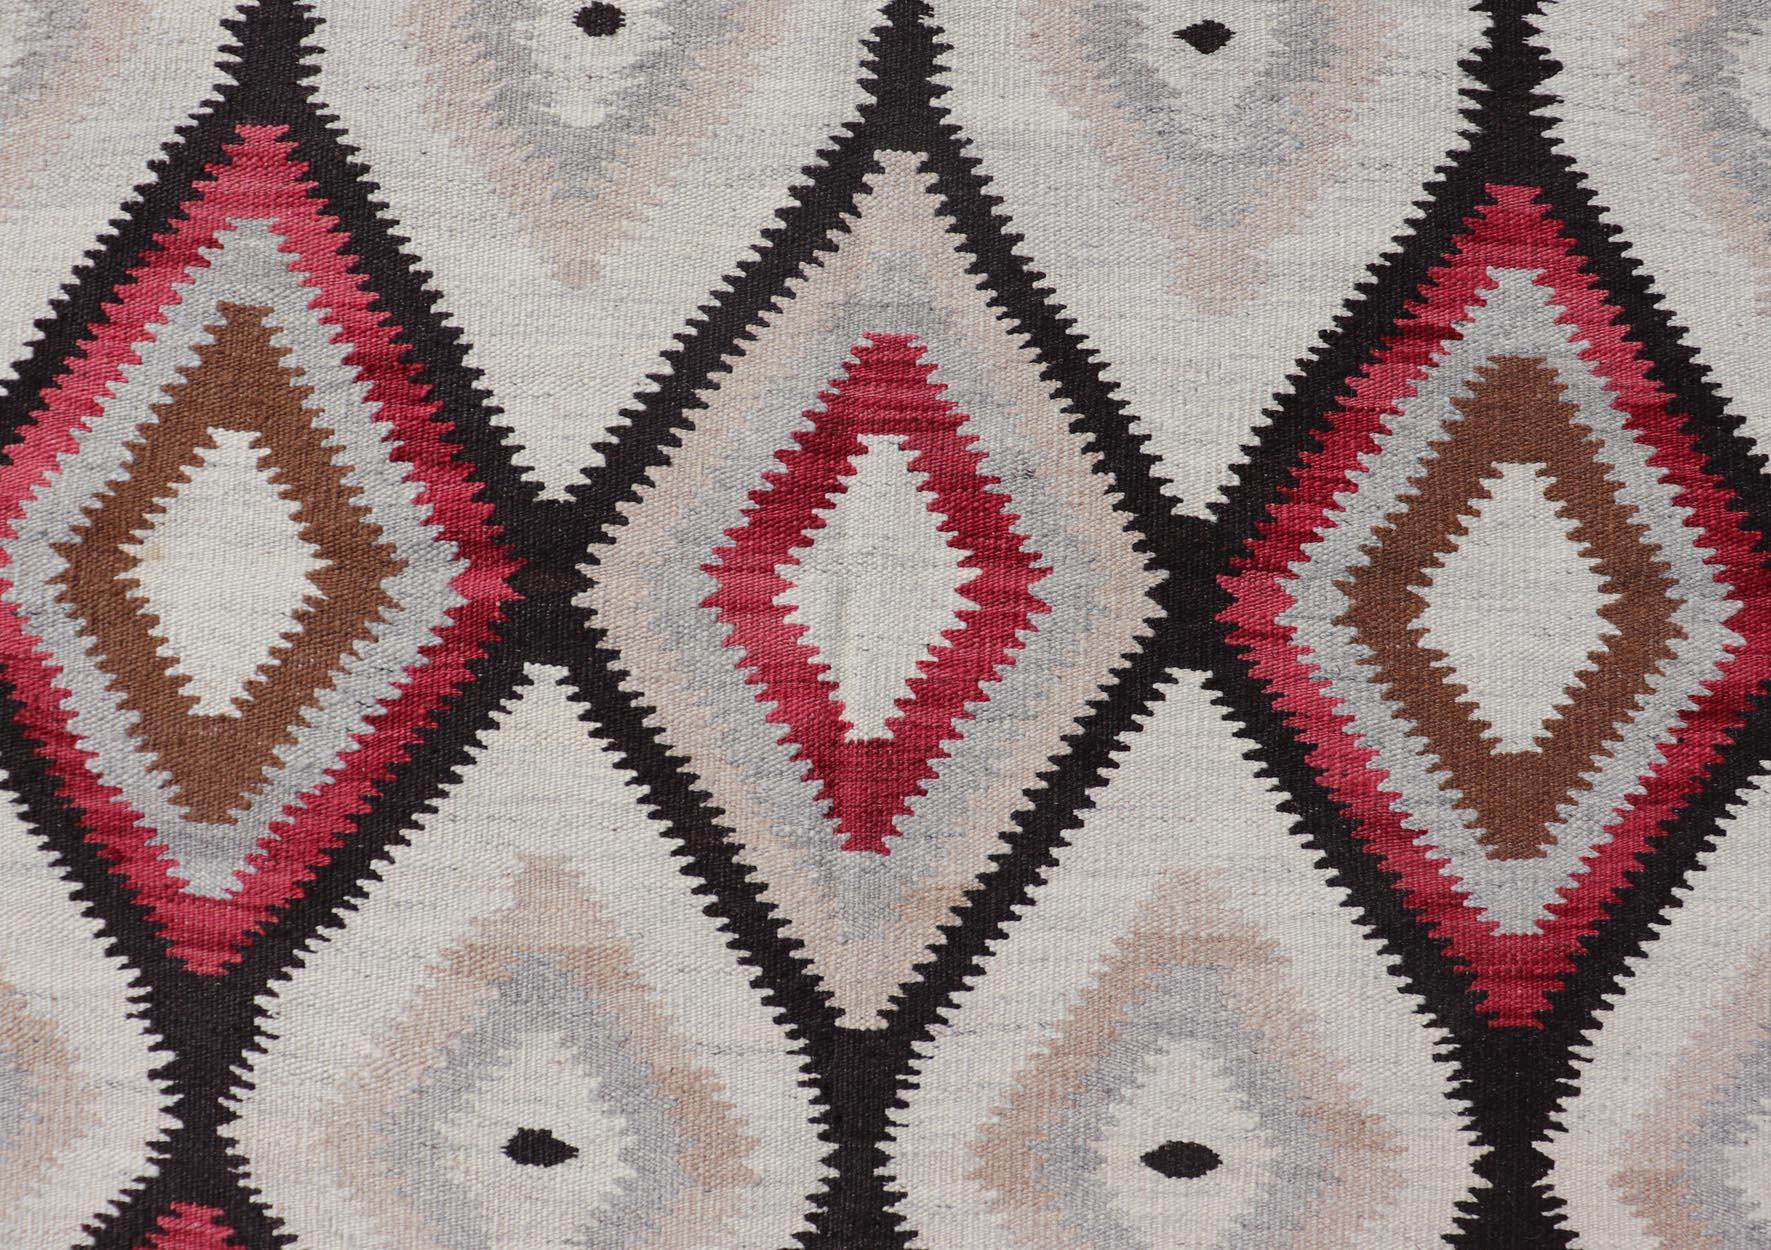 Indian American Navajo Design Rug with Latticework Tribal Design in Red, Black and Gray For Sale